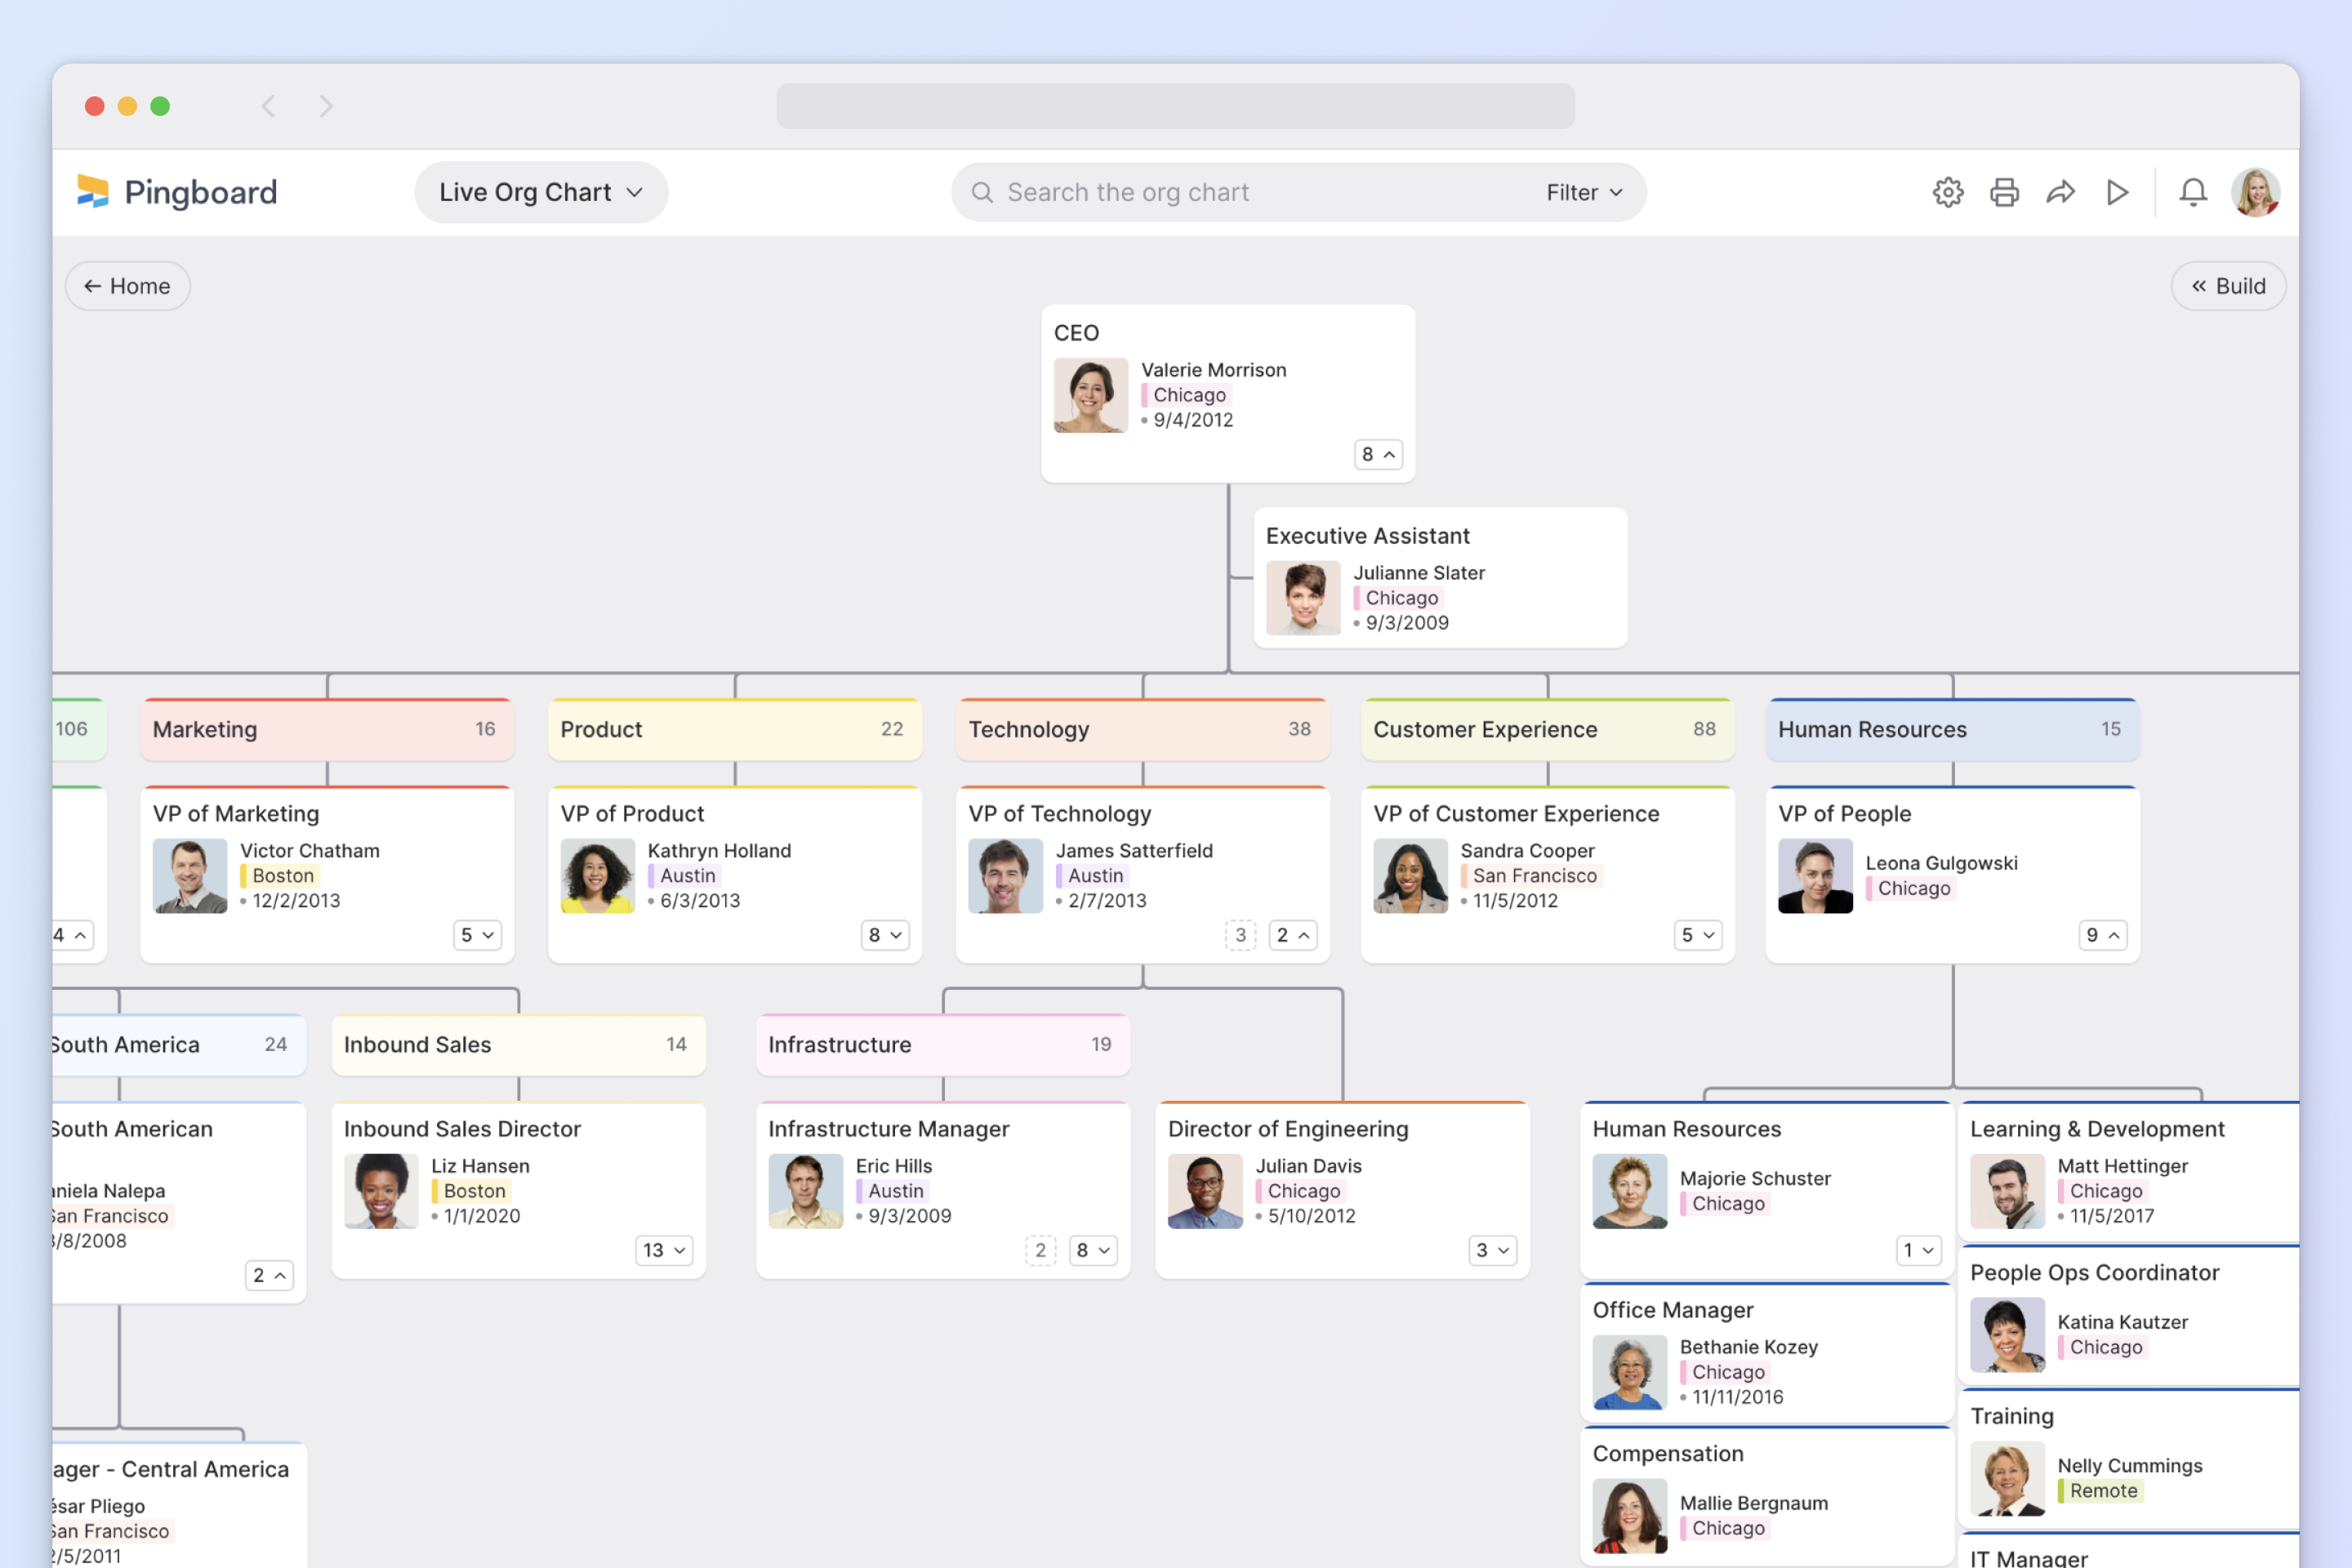 Easily visualize your company for your leaders, team, and board